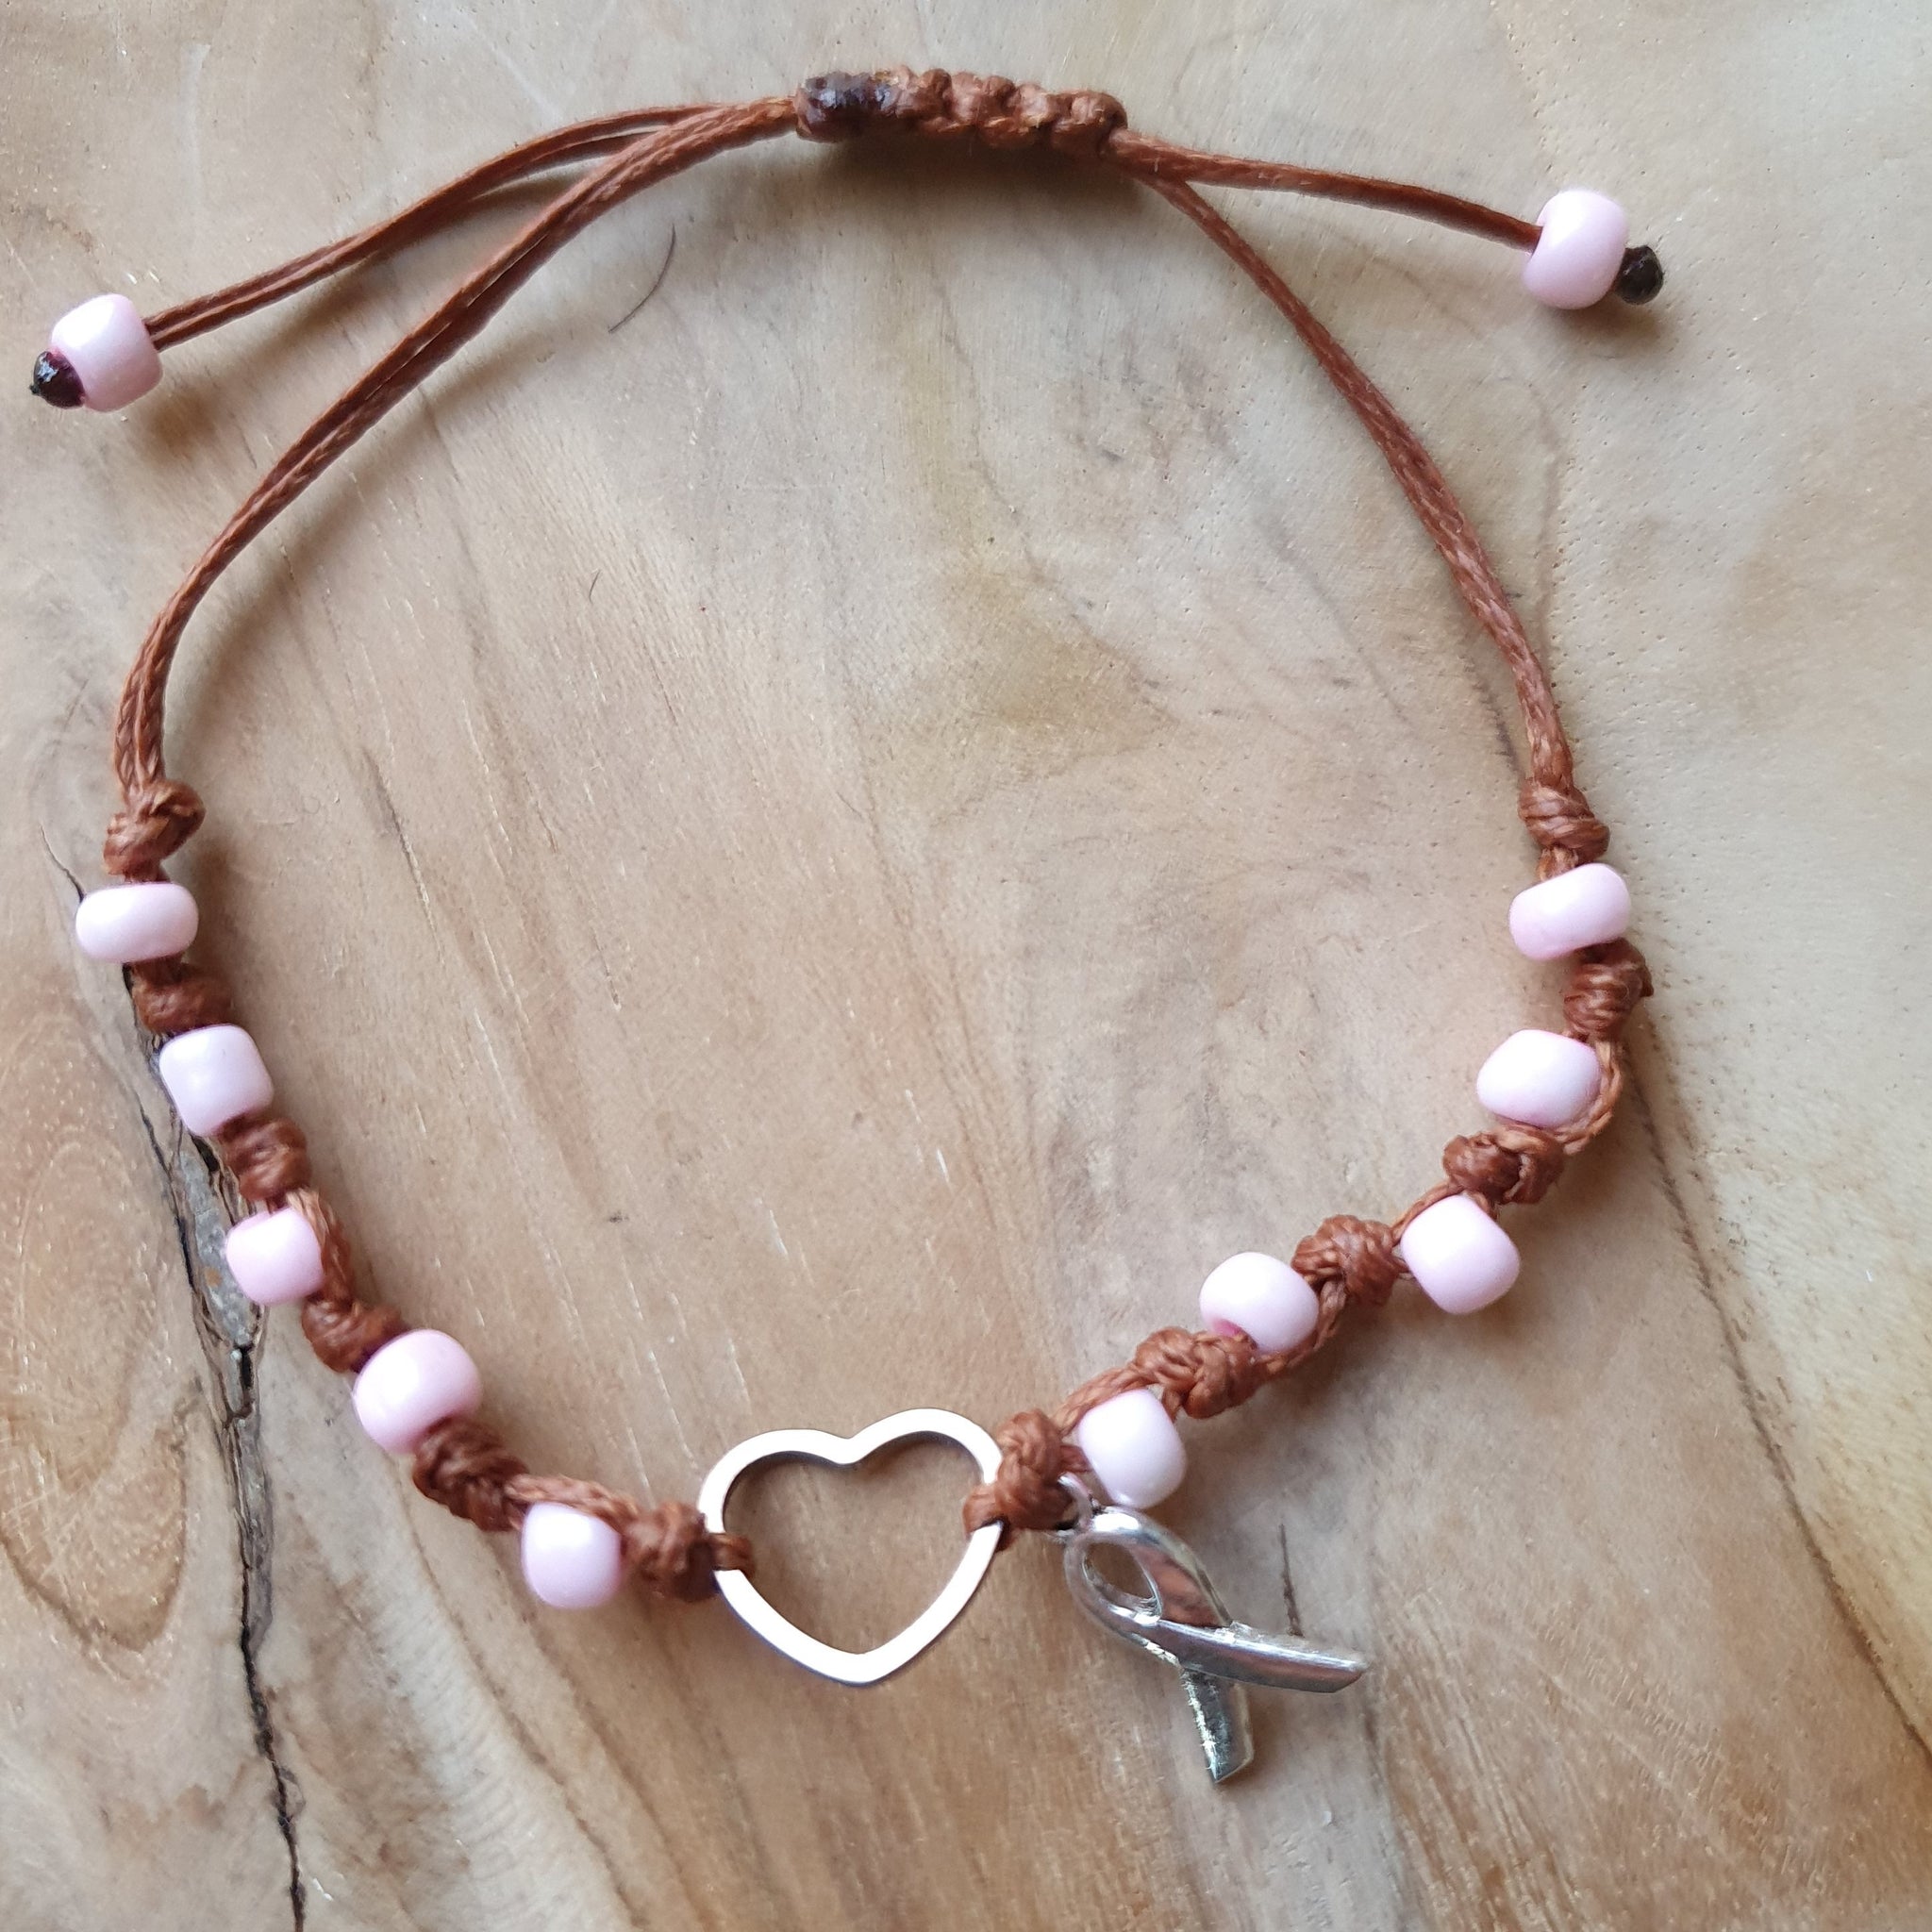 Silver stainless steel heart bracelet with pink beads